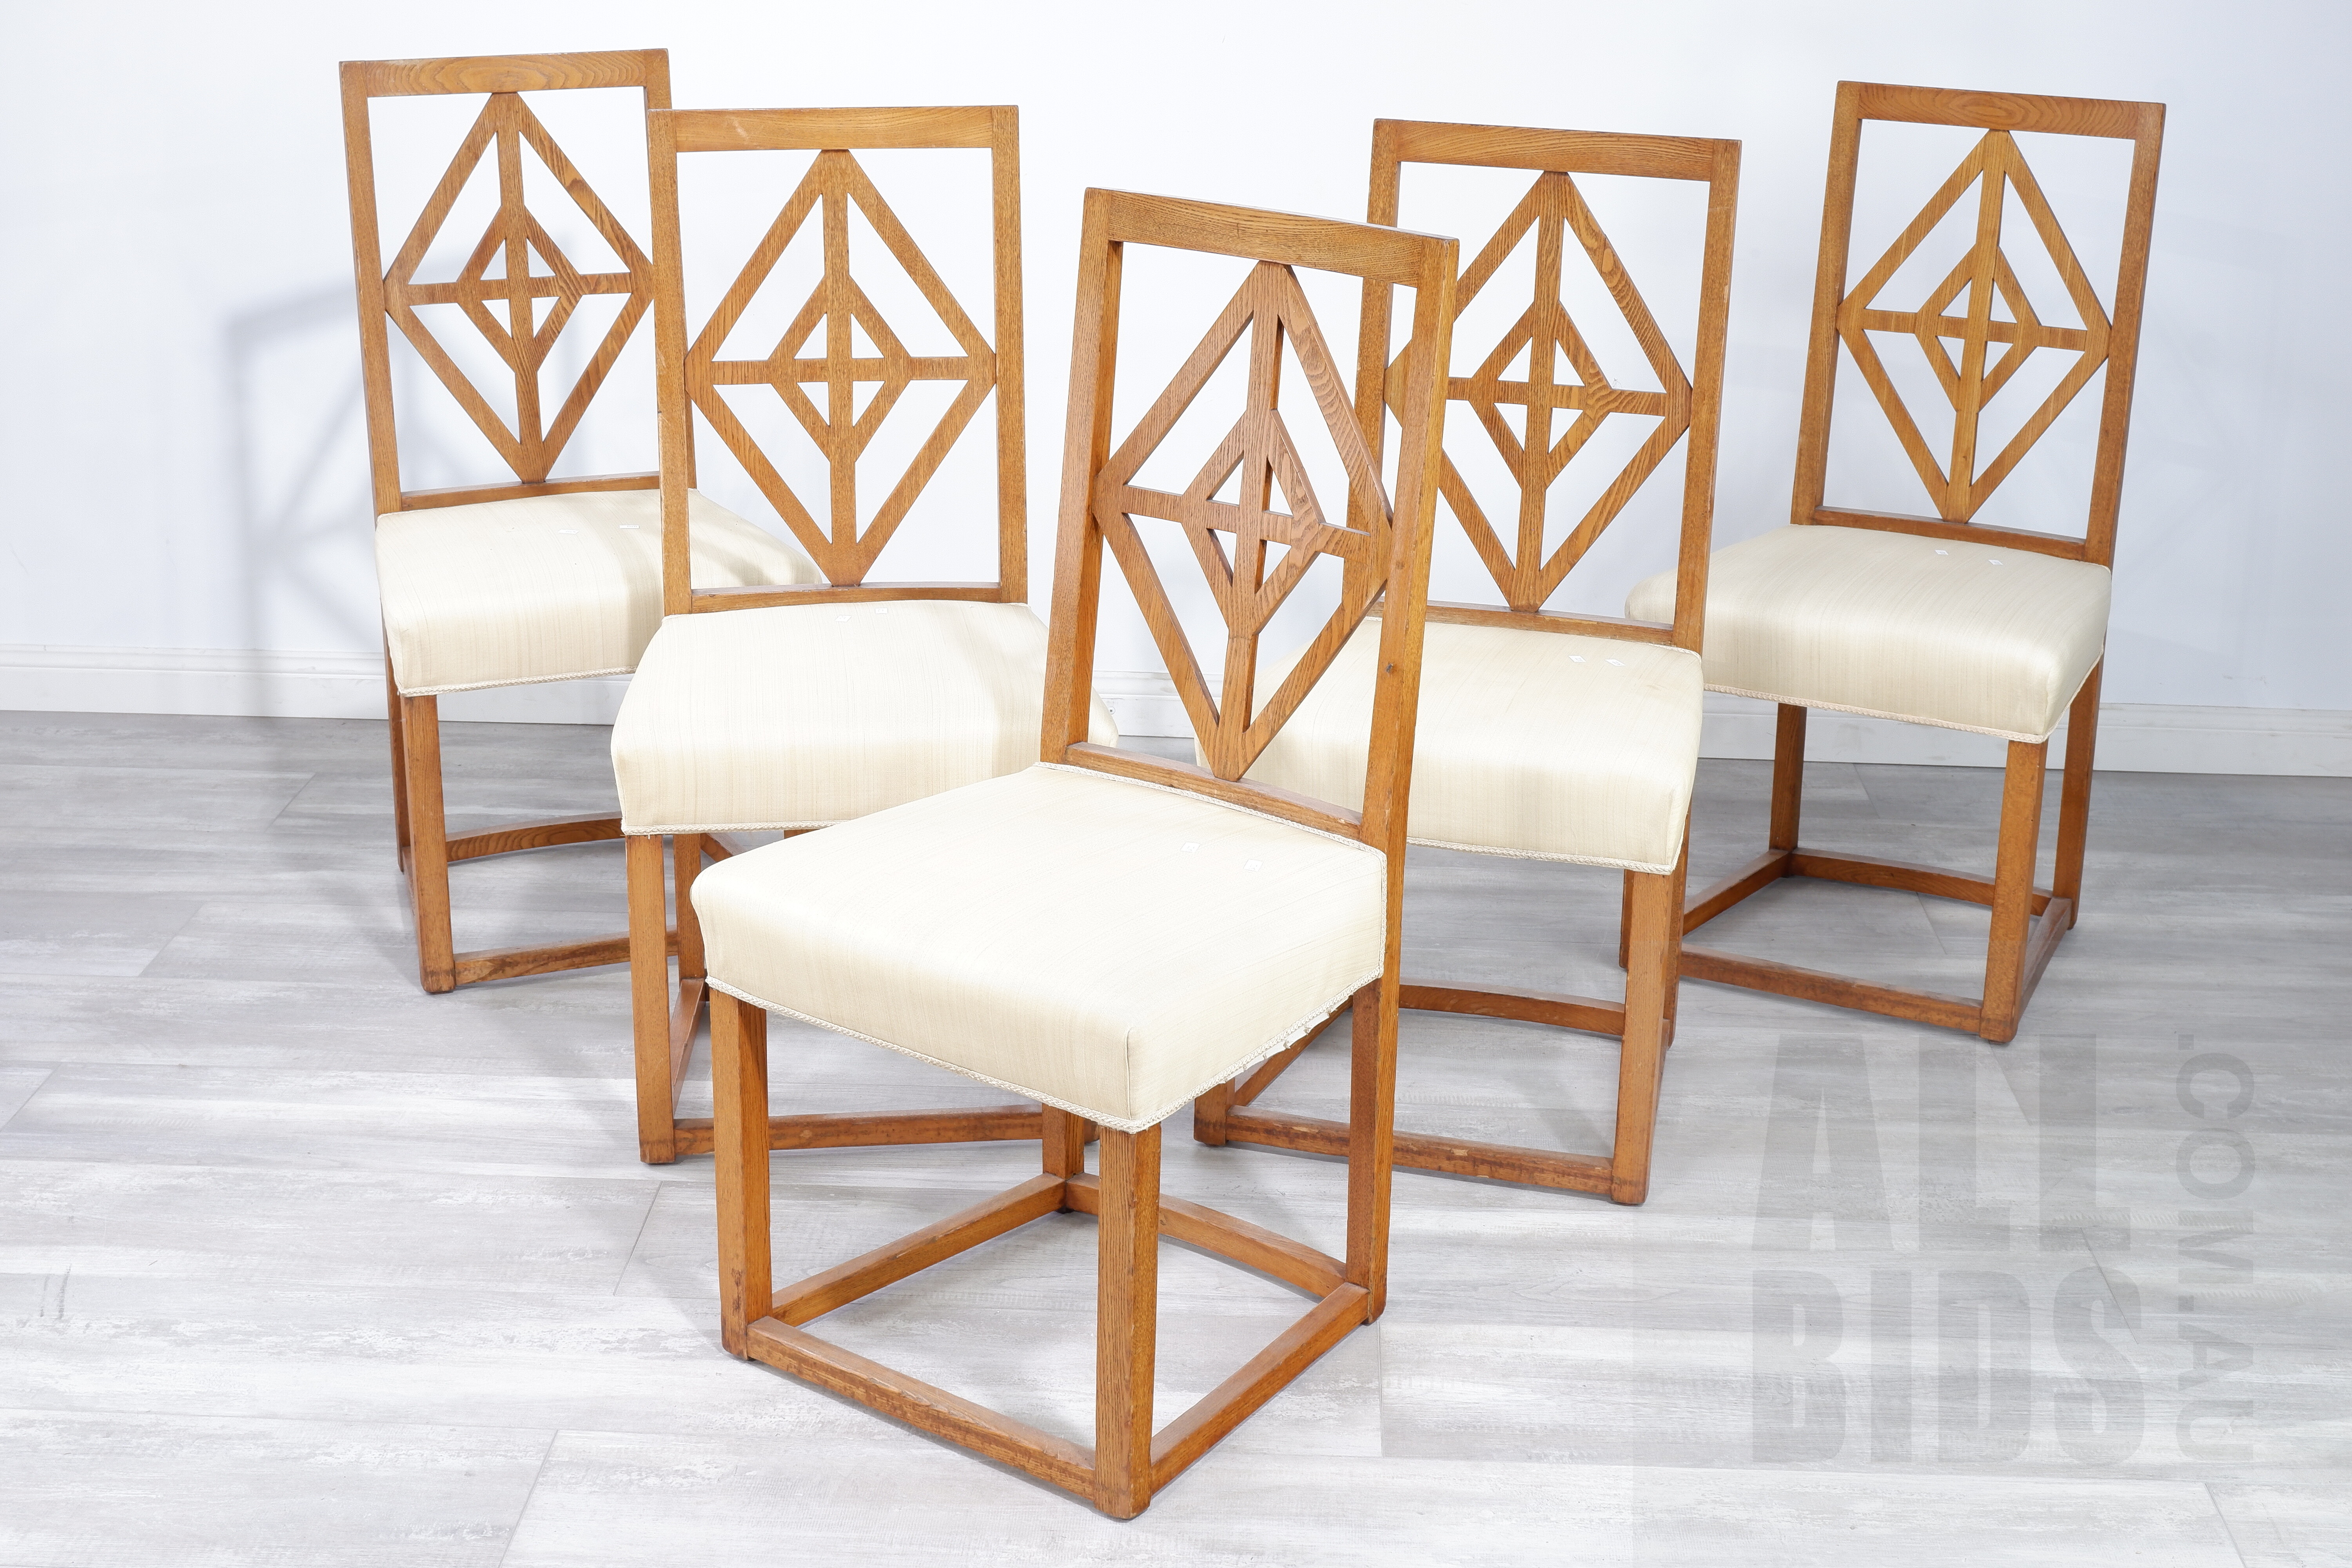 'Set of Five Continental Secessionist Oak Dining Chairs Circa 1905, Probably Austrian'